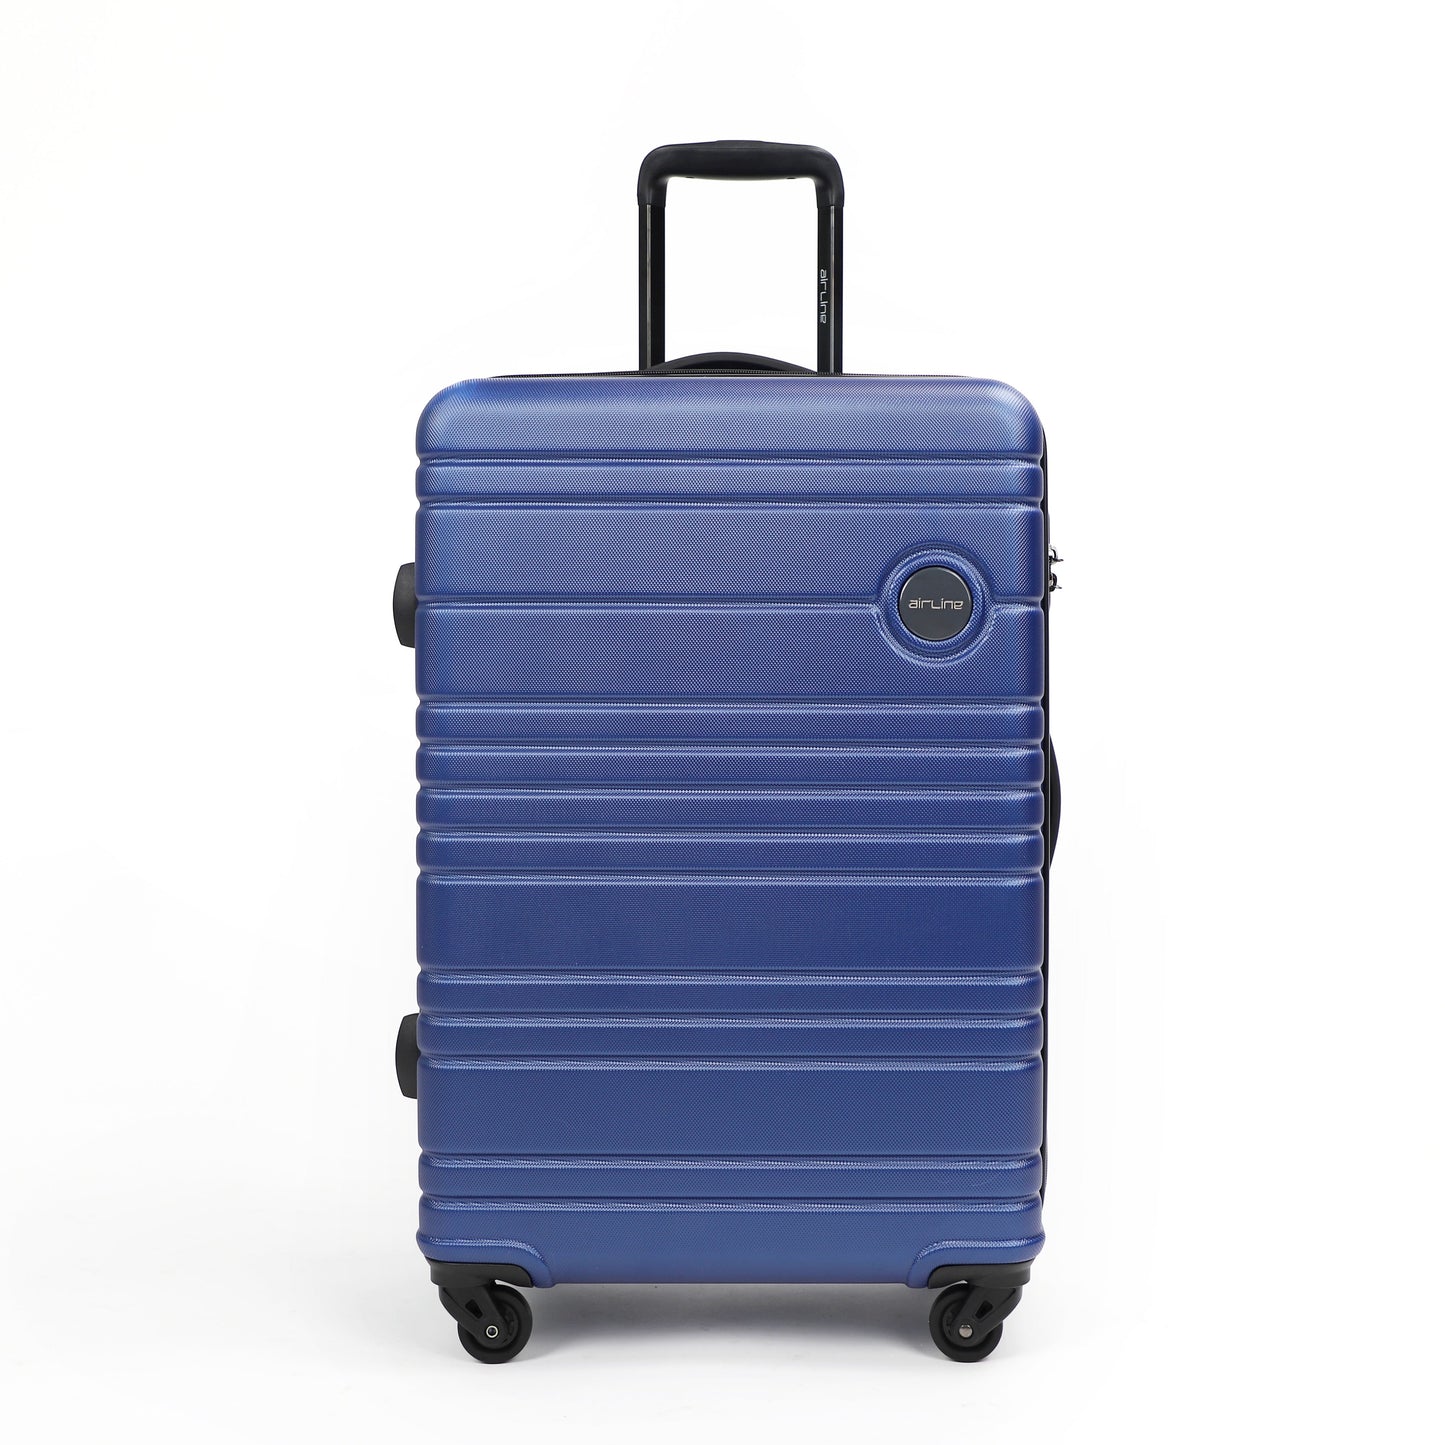 Airline_Luggage_Sets_3peice_Blue_front_viewN12721005